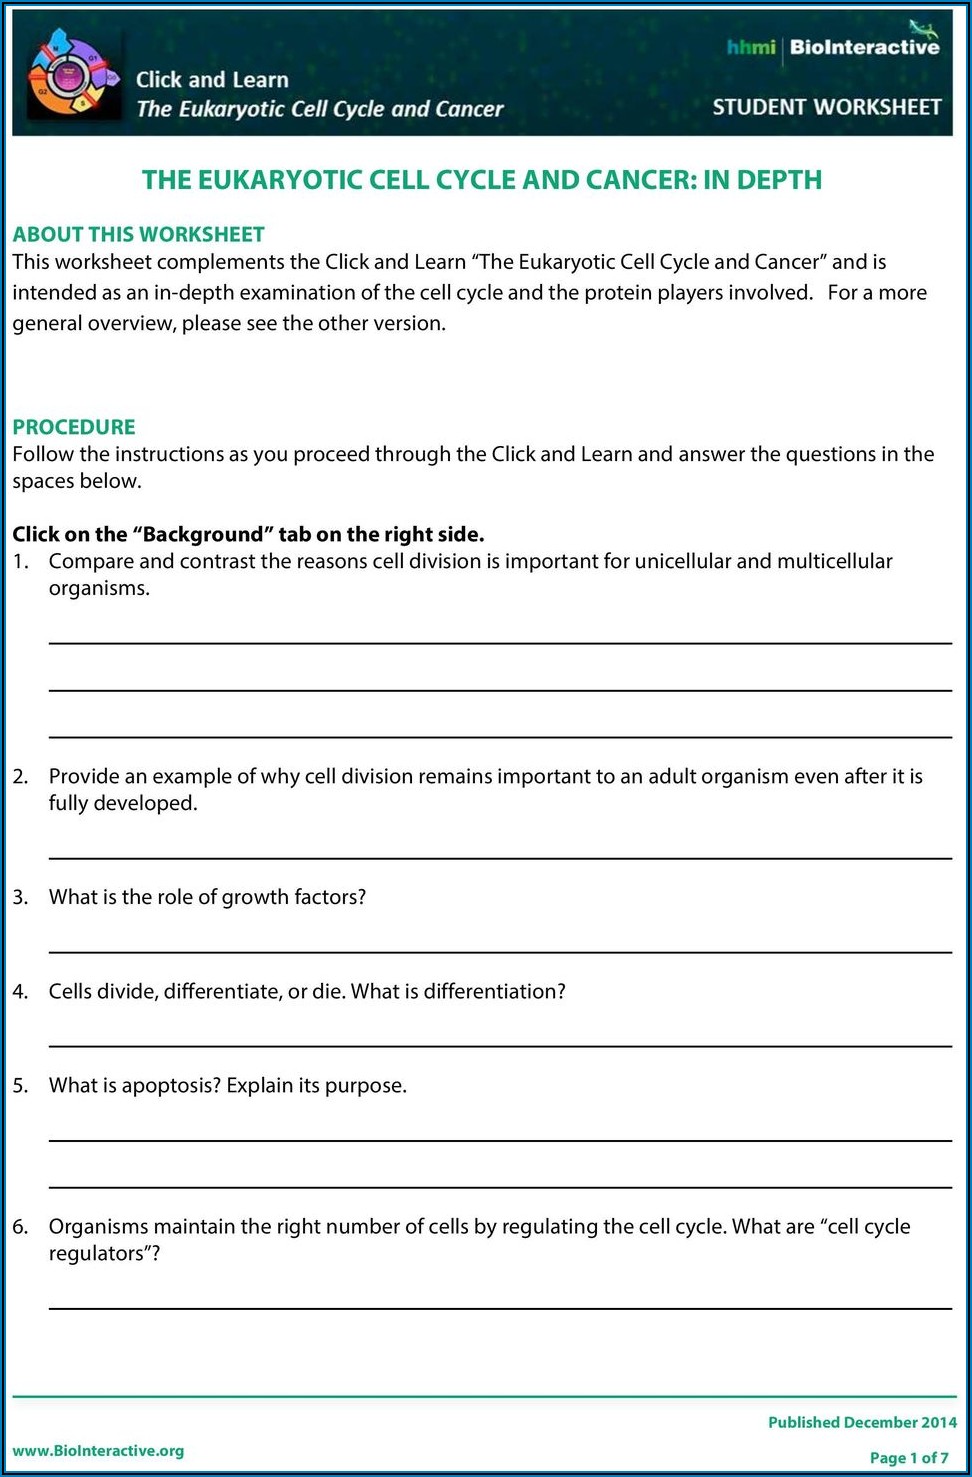 Hhmi Cell Cycle And Cancer Worksheet Answers